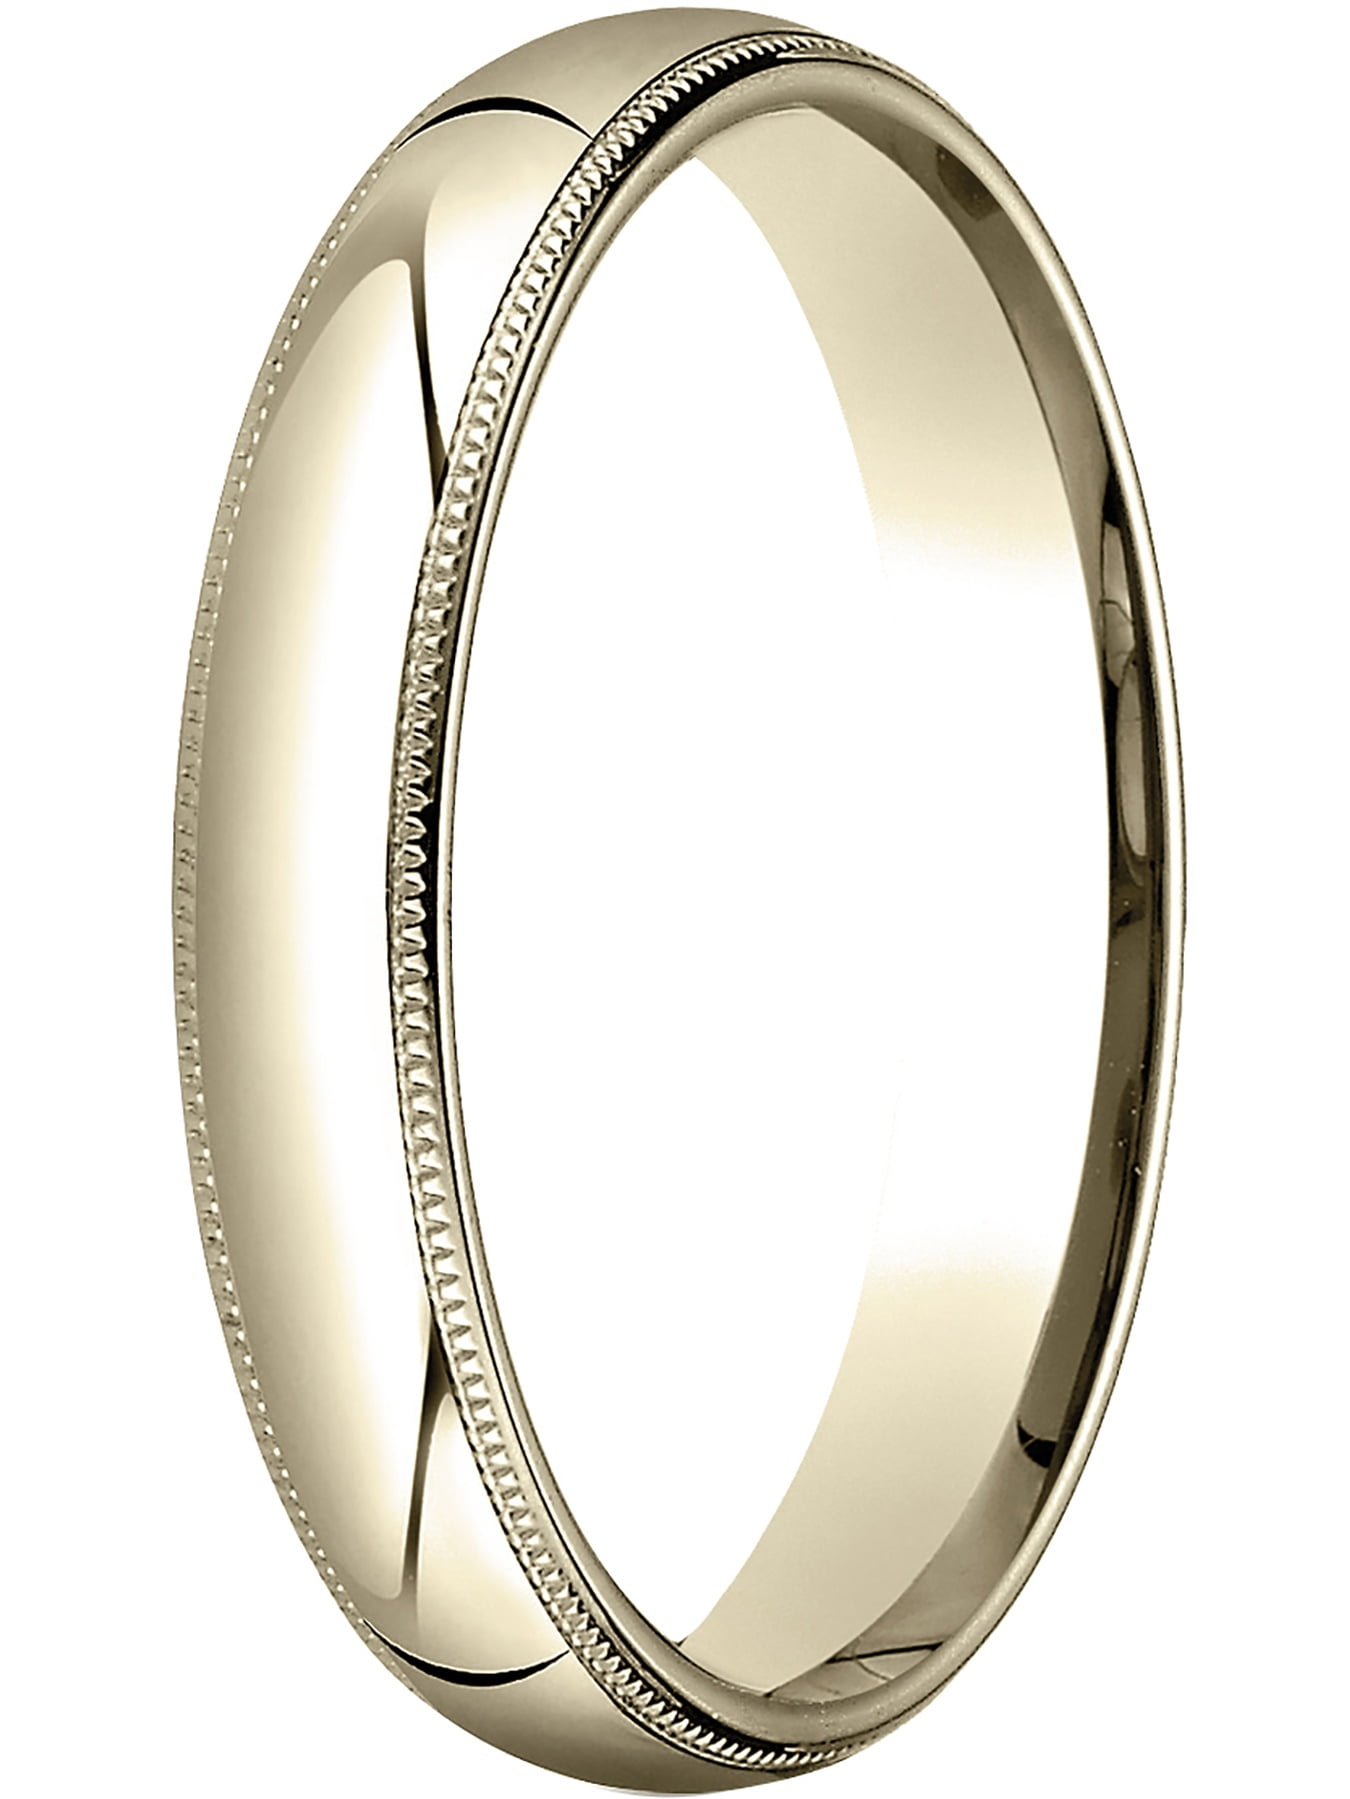 Benchmark 14K Yellow Gold 3mm Slightly Domed Traditional Oval Wedding Band Ring Sizes 4-15